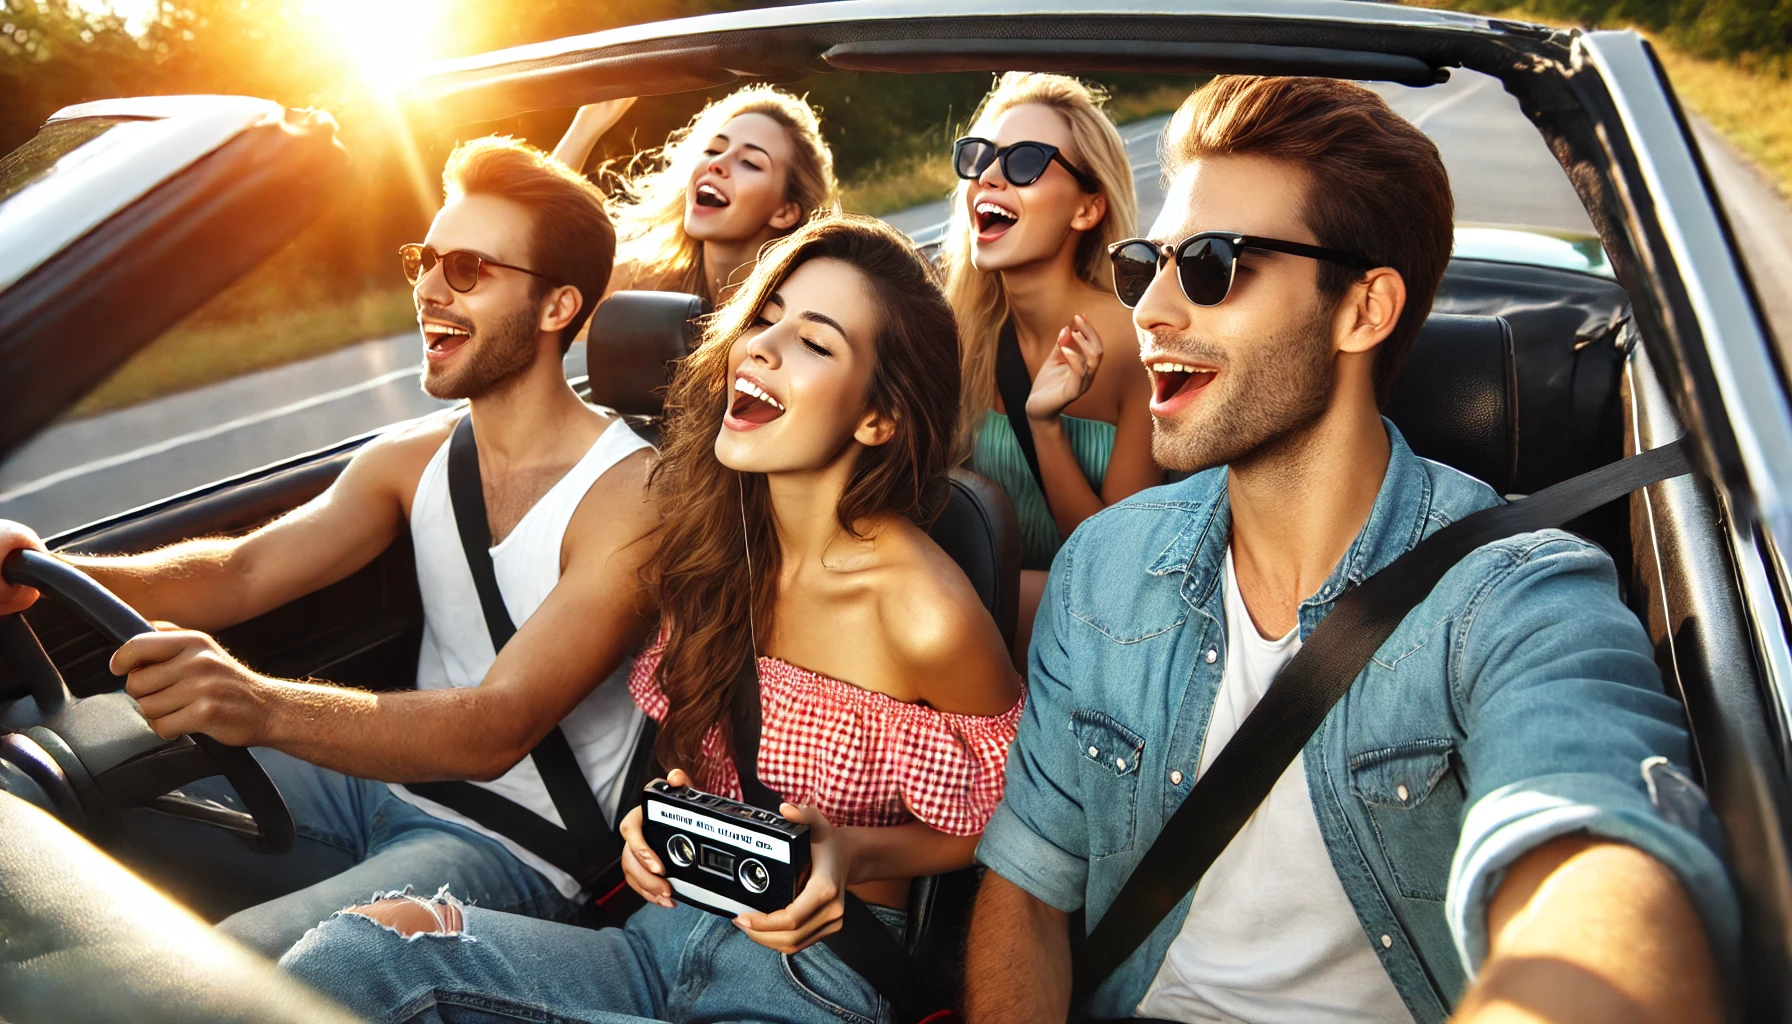 DALL·E 2024-07-18 10.17.46 - A group of young adults (ages 18-34) having a fun road trip in a convertible car on a sunny day. They are singing along to music and enjoying the open